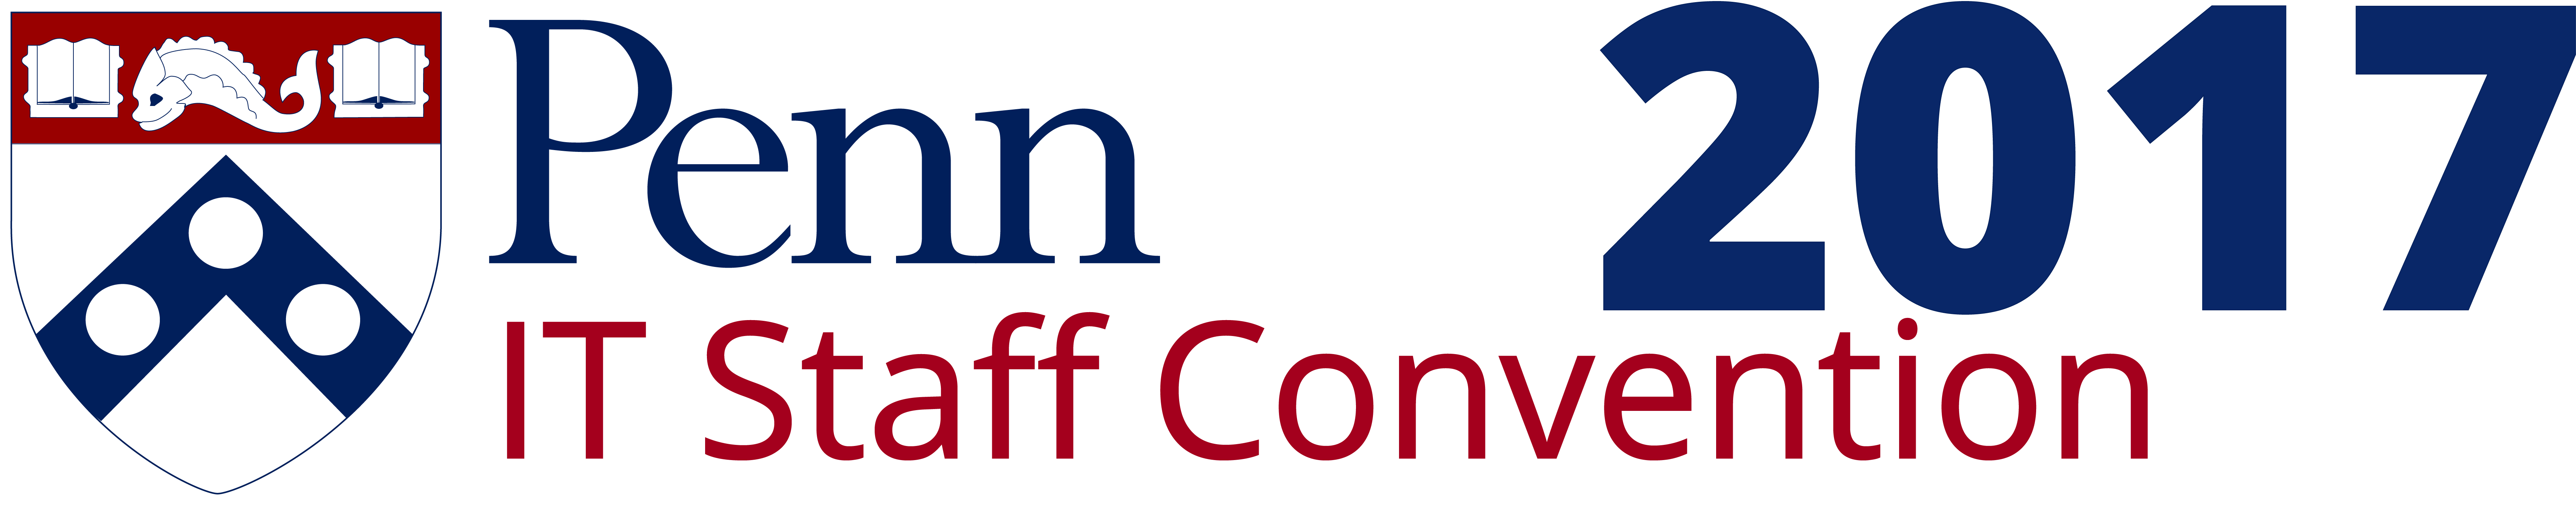 Penn I T Staff Convention2017 Logo PNG